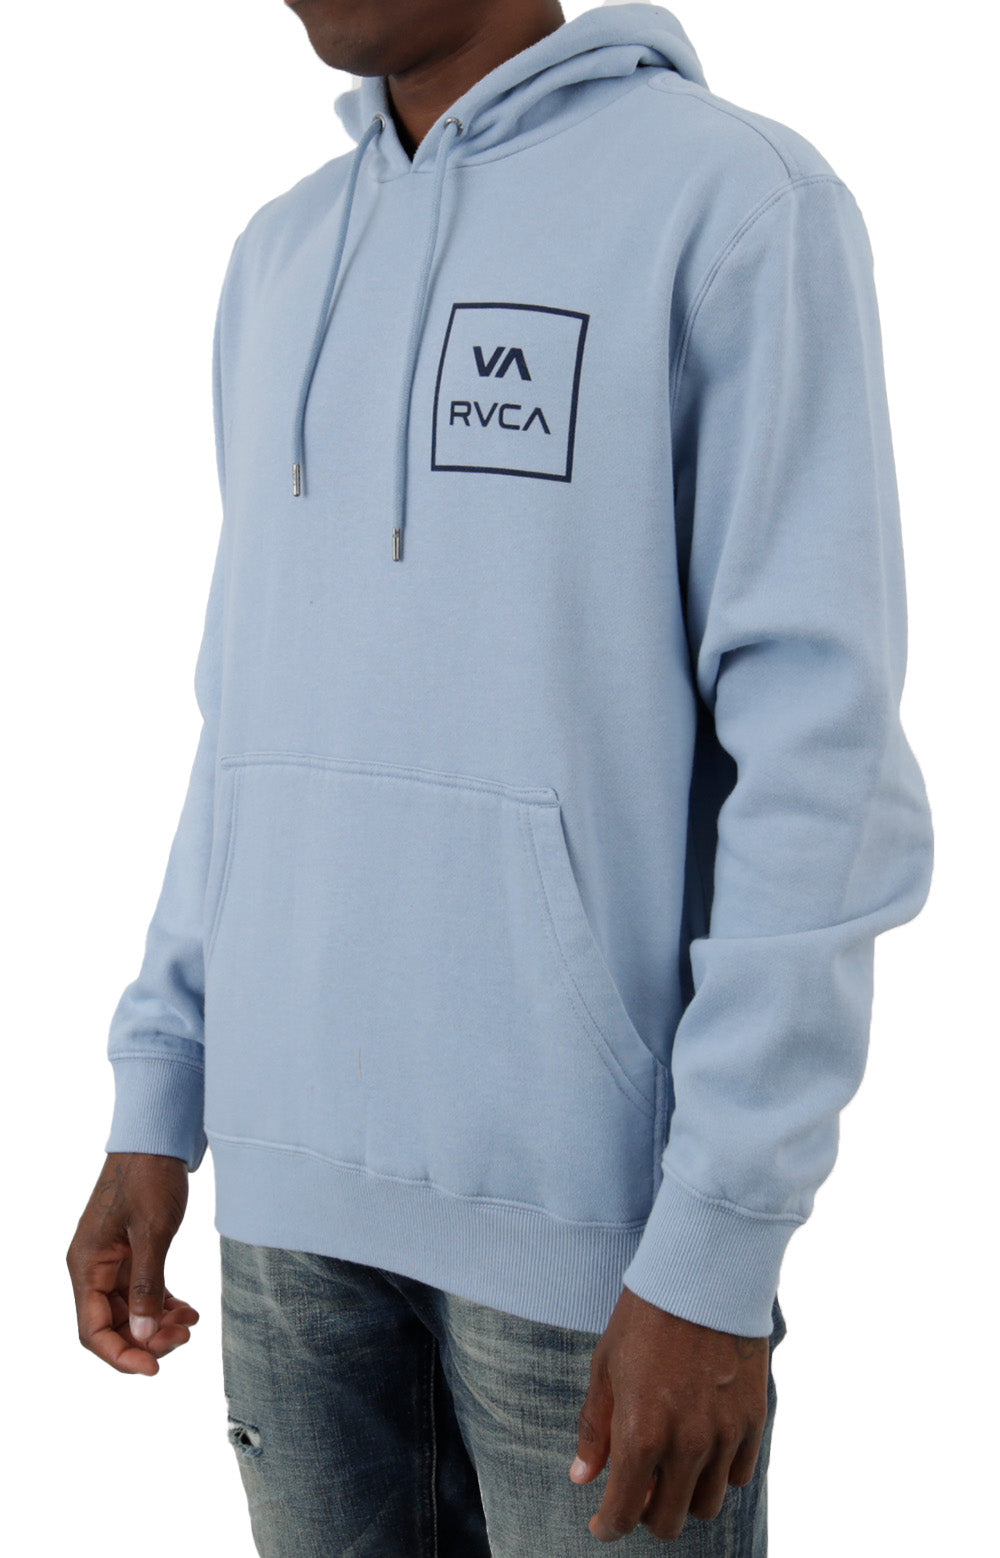 VA All The Way Pullover Hoodie - Ash Blue